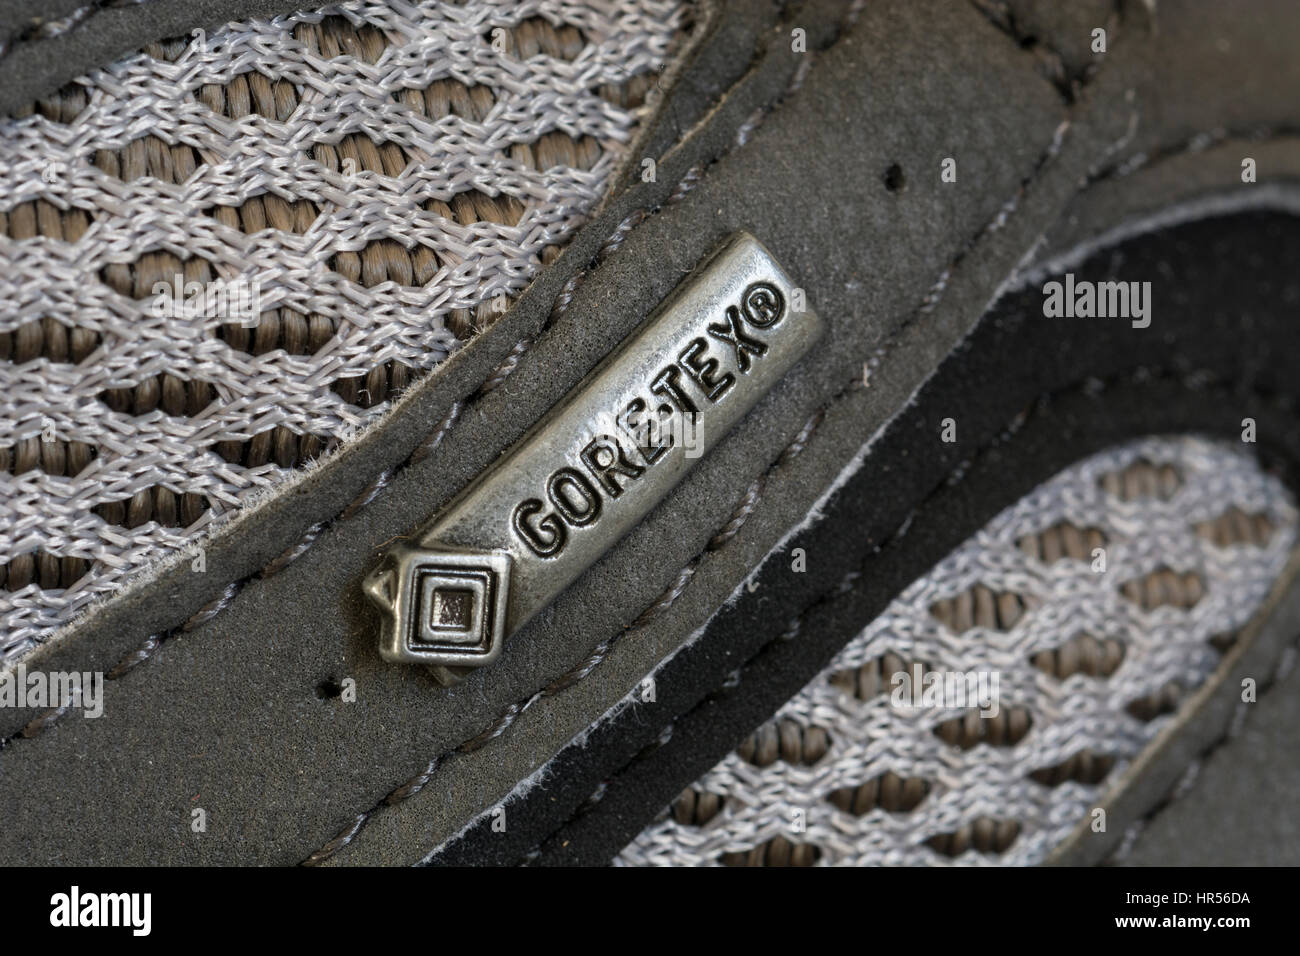 Gore-tex label on a Merrell walking shoe Stock Photo